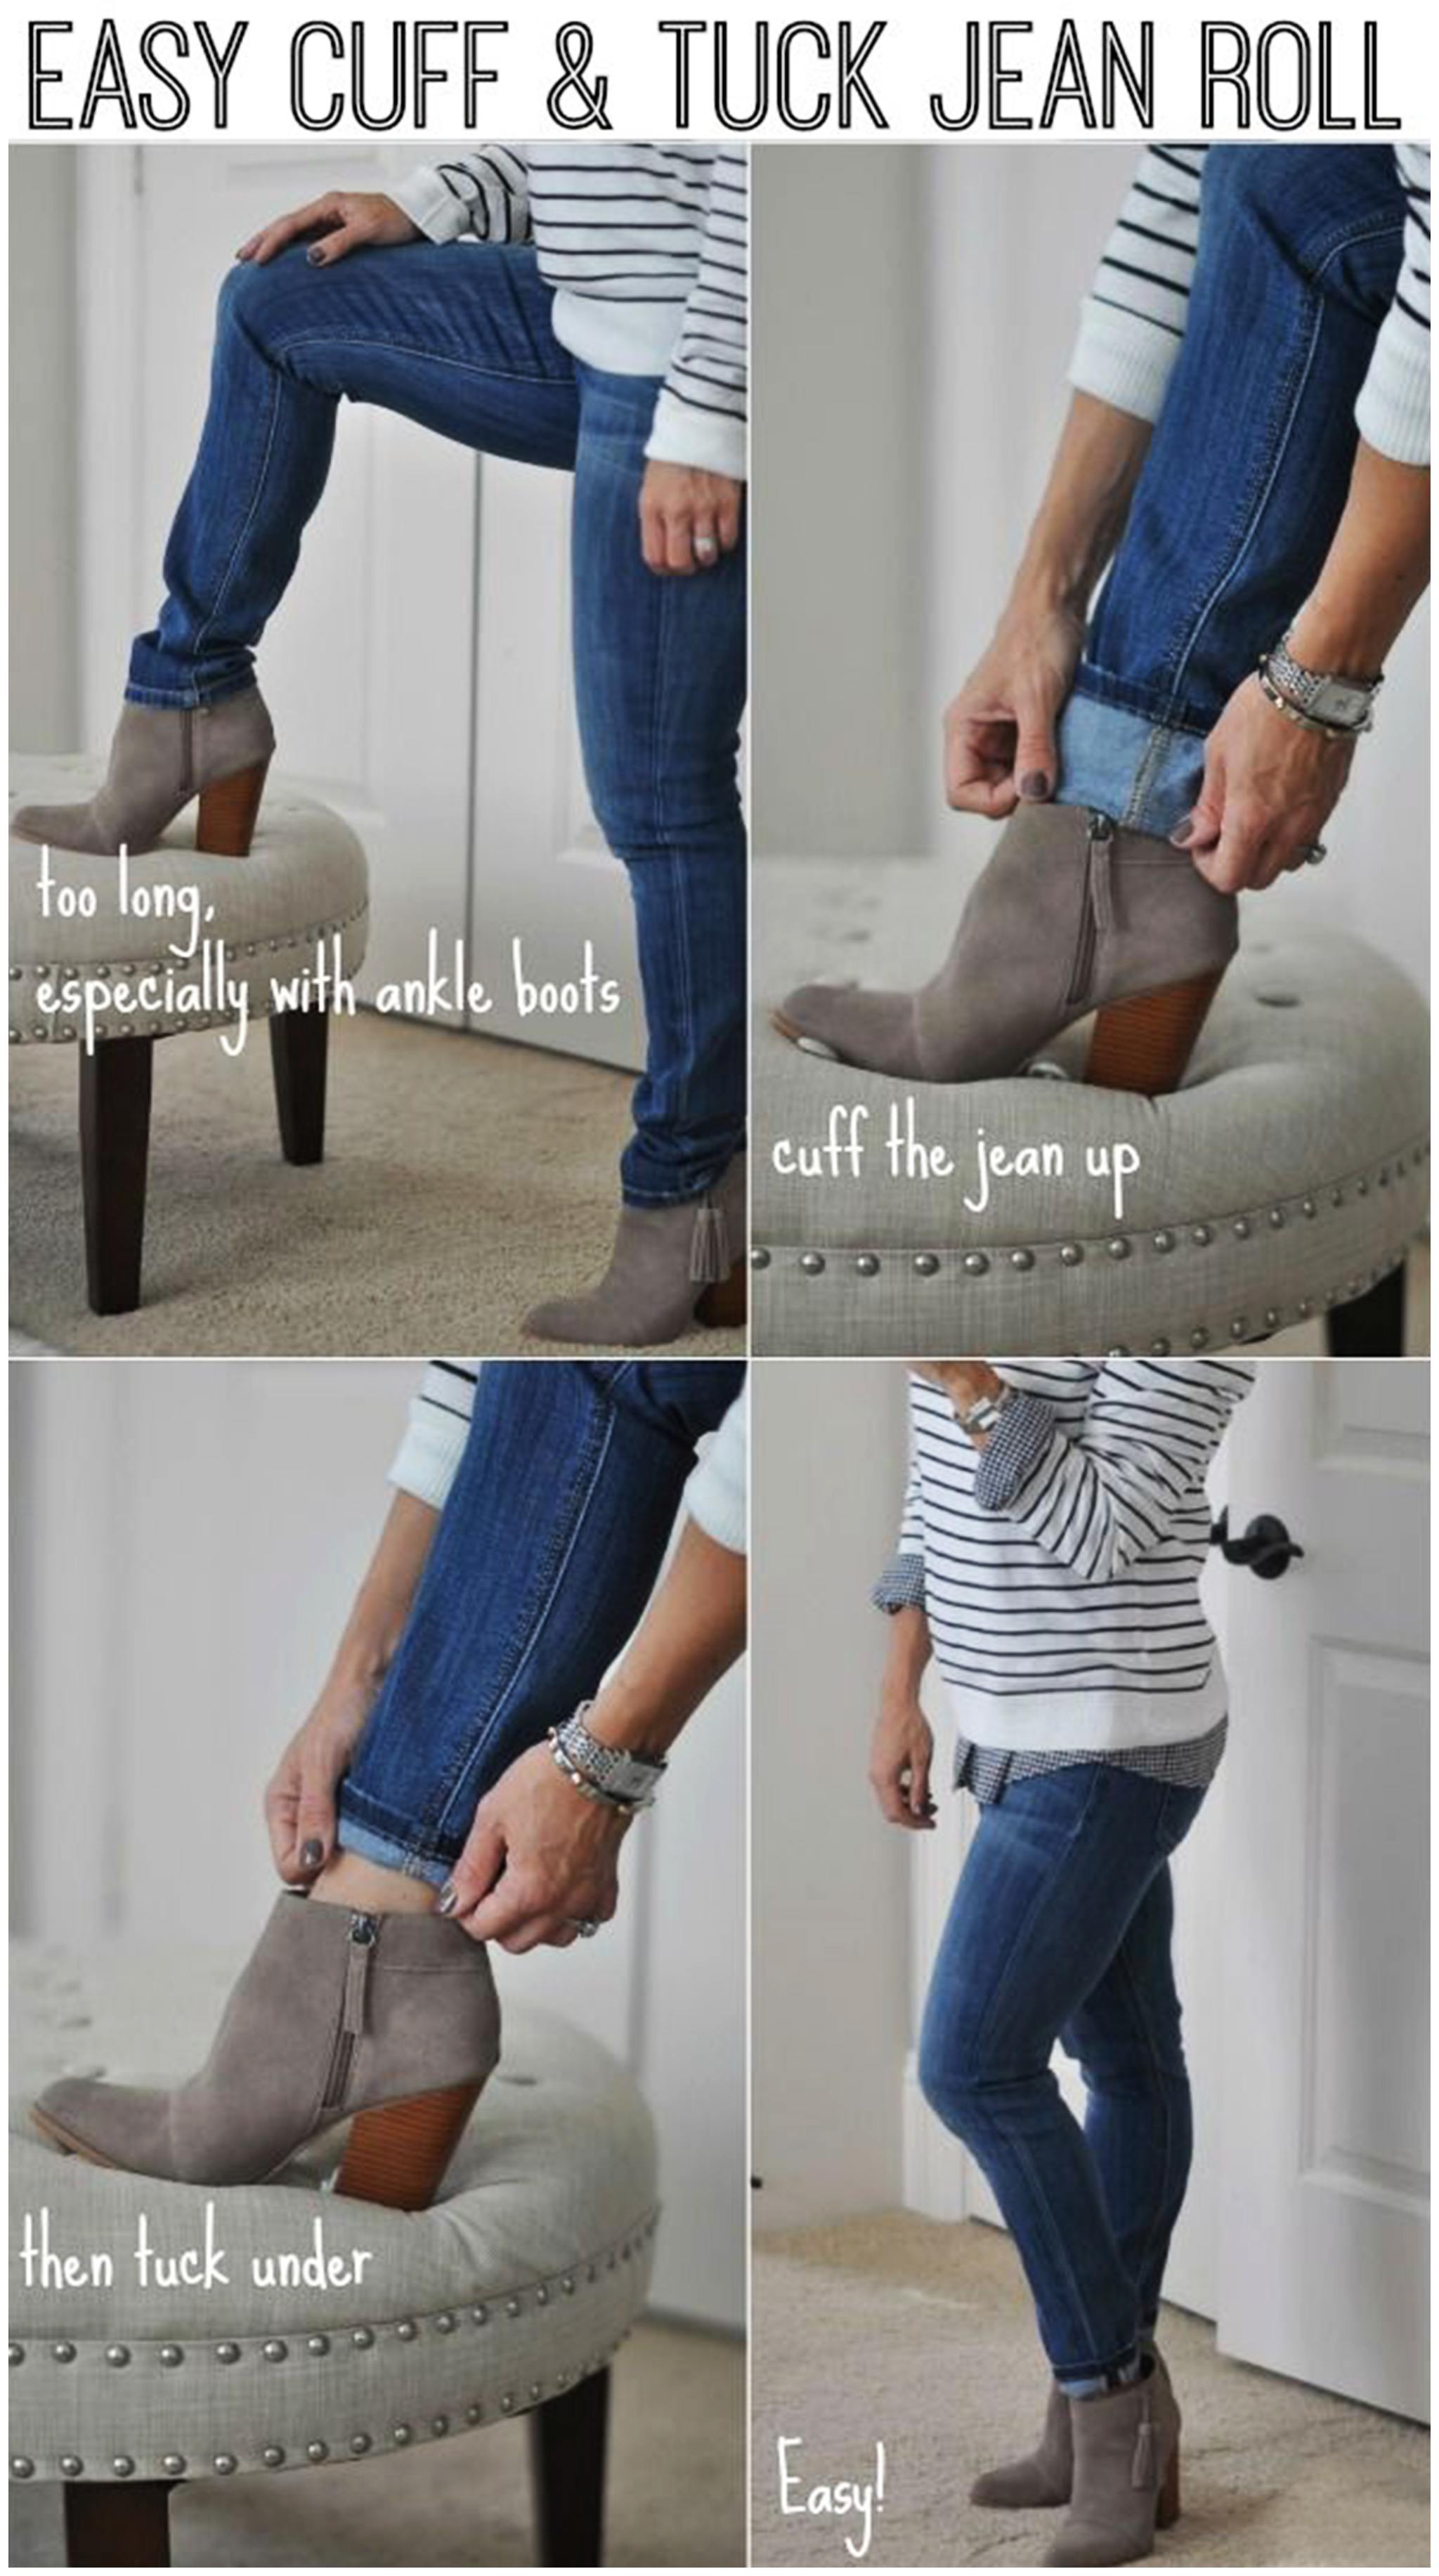 Easy way to roll your jeans - cuff and tuck